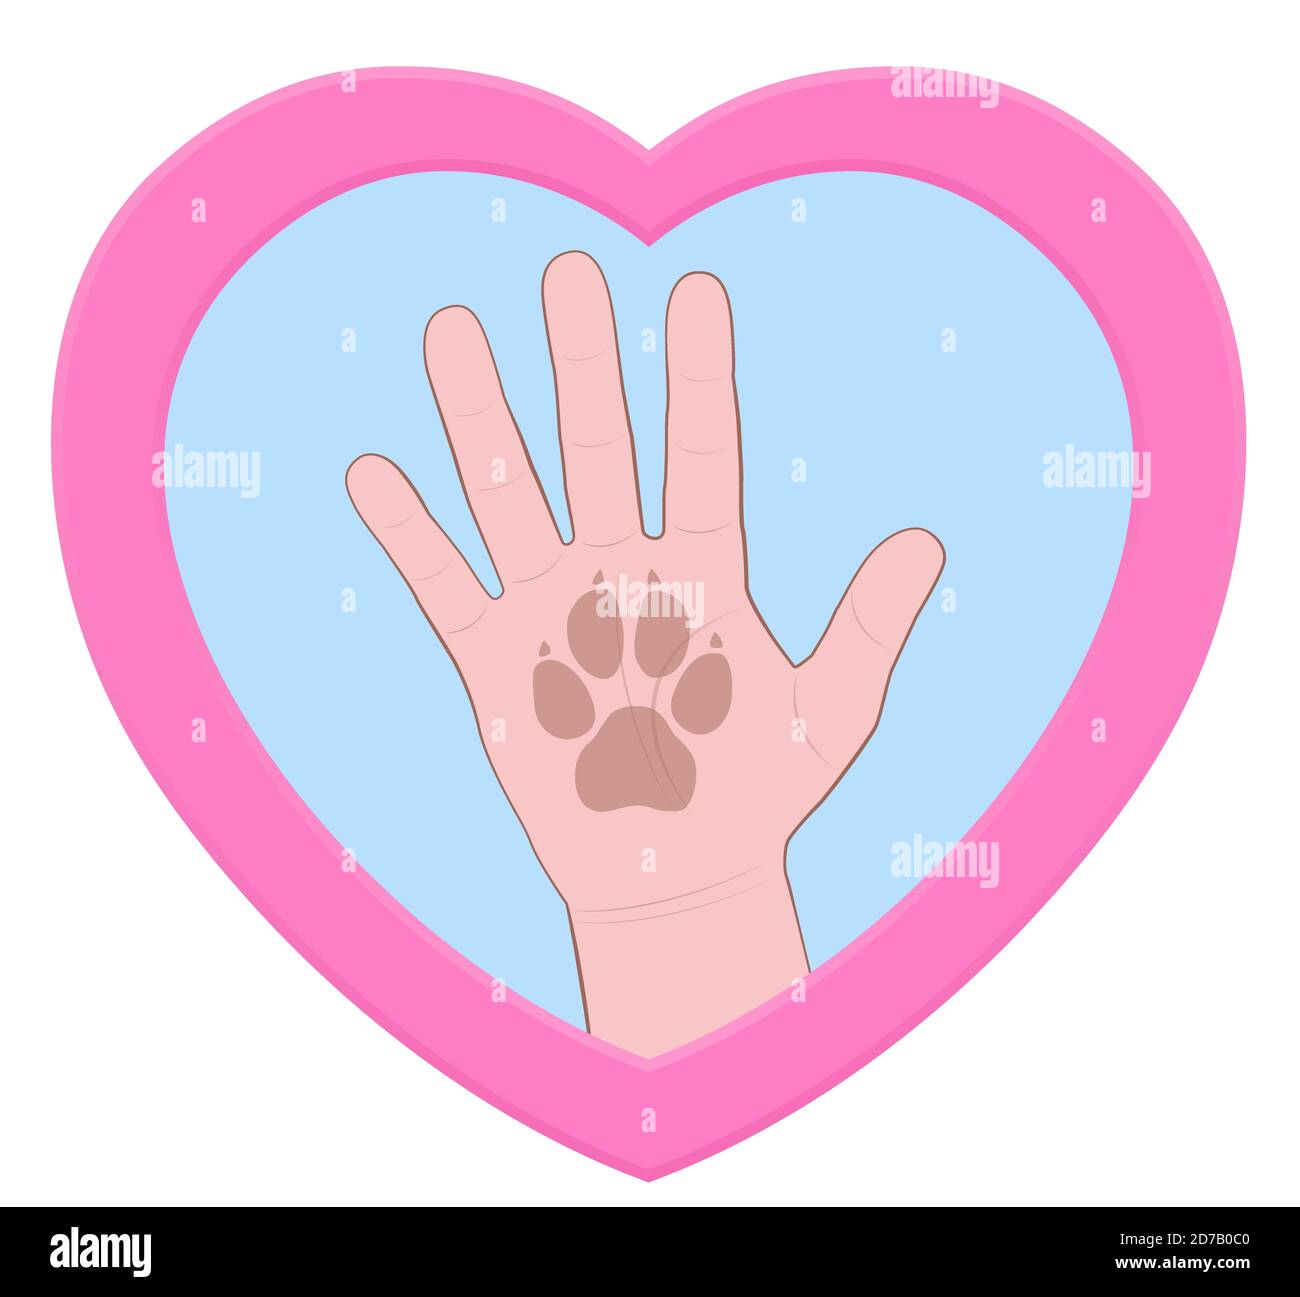 High five. Human hand with dogs paw print in a pink heart shaped logo symbol - comic illustration on white background. Stock Photo